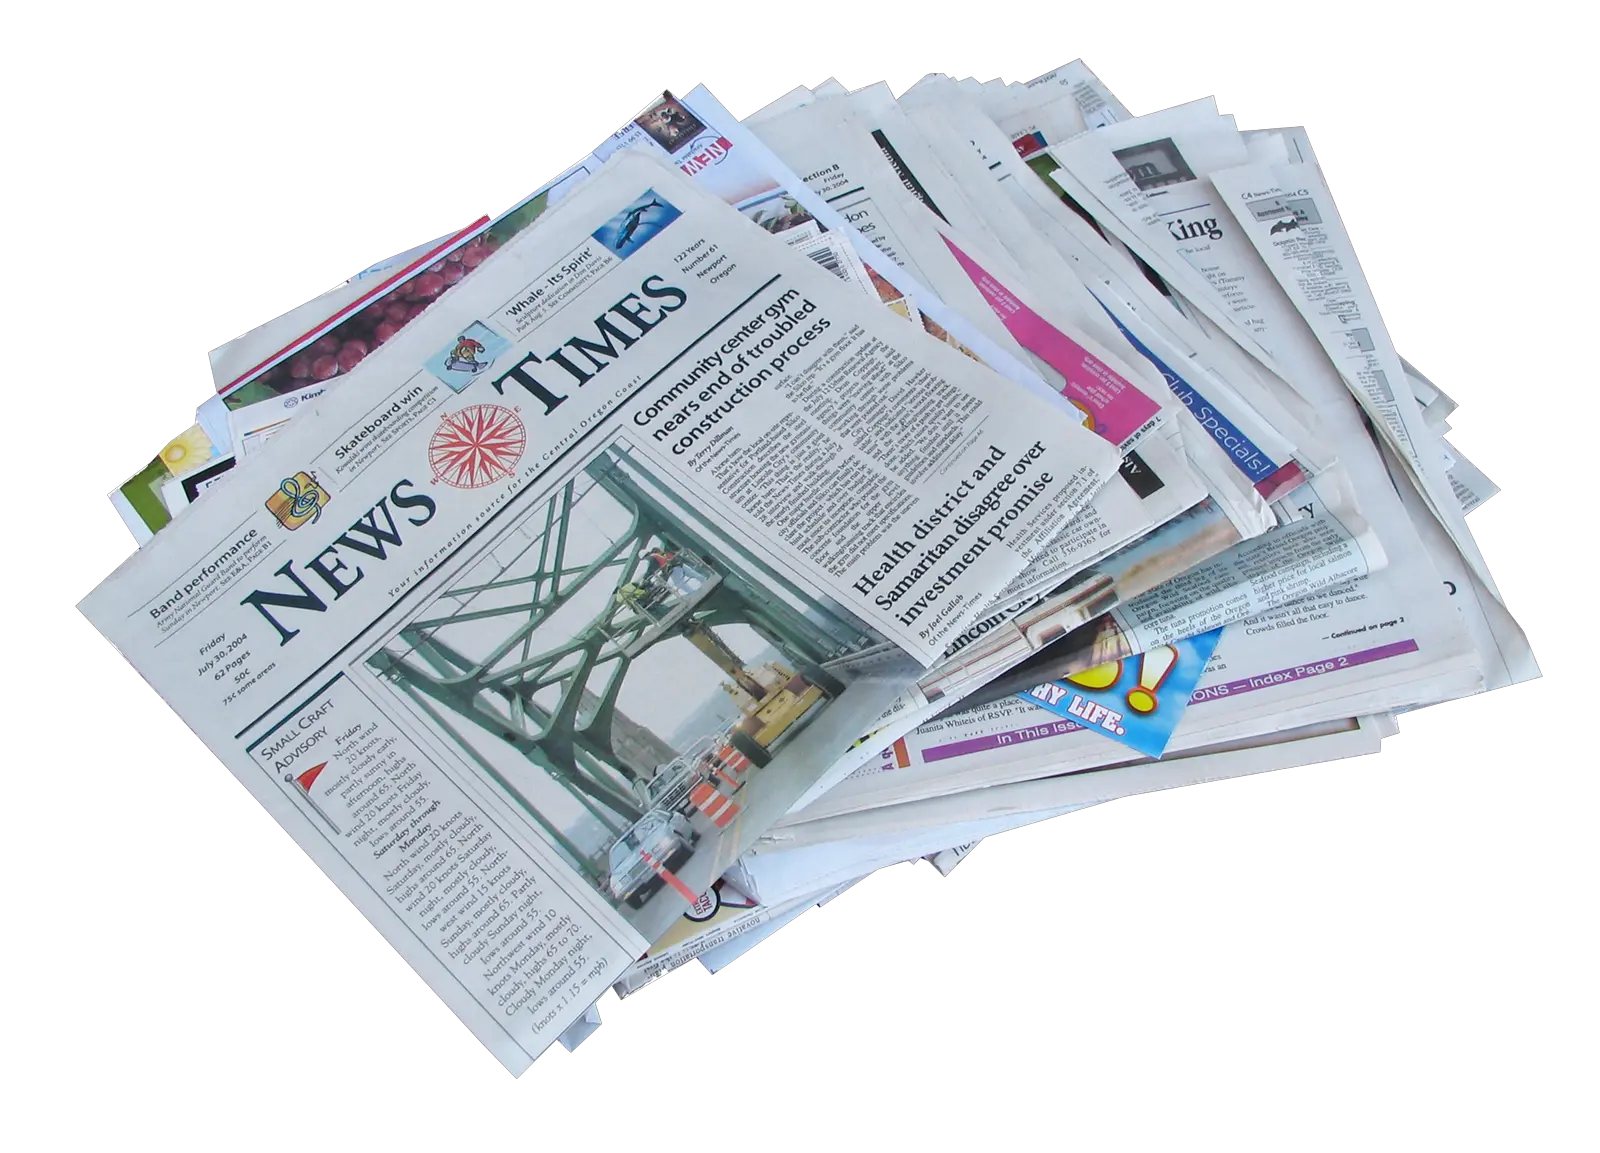 News Paper Png Image News Paper Png Images Download News Paper Png